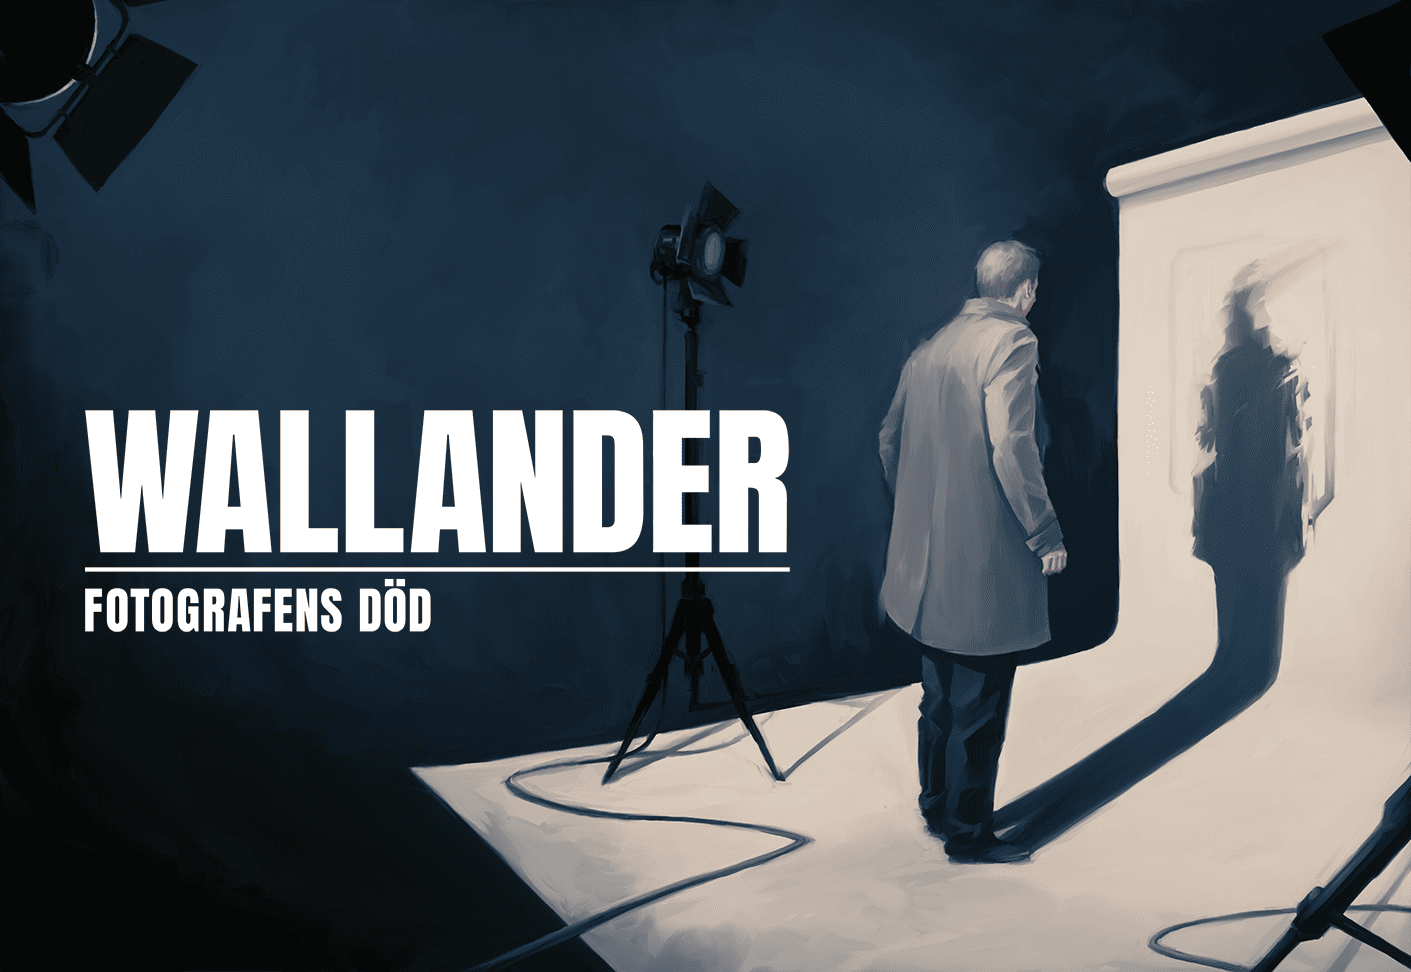 Wallander: The Death of the Photographer